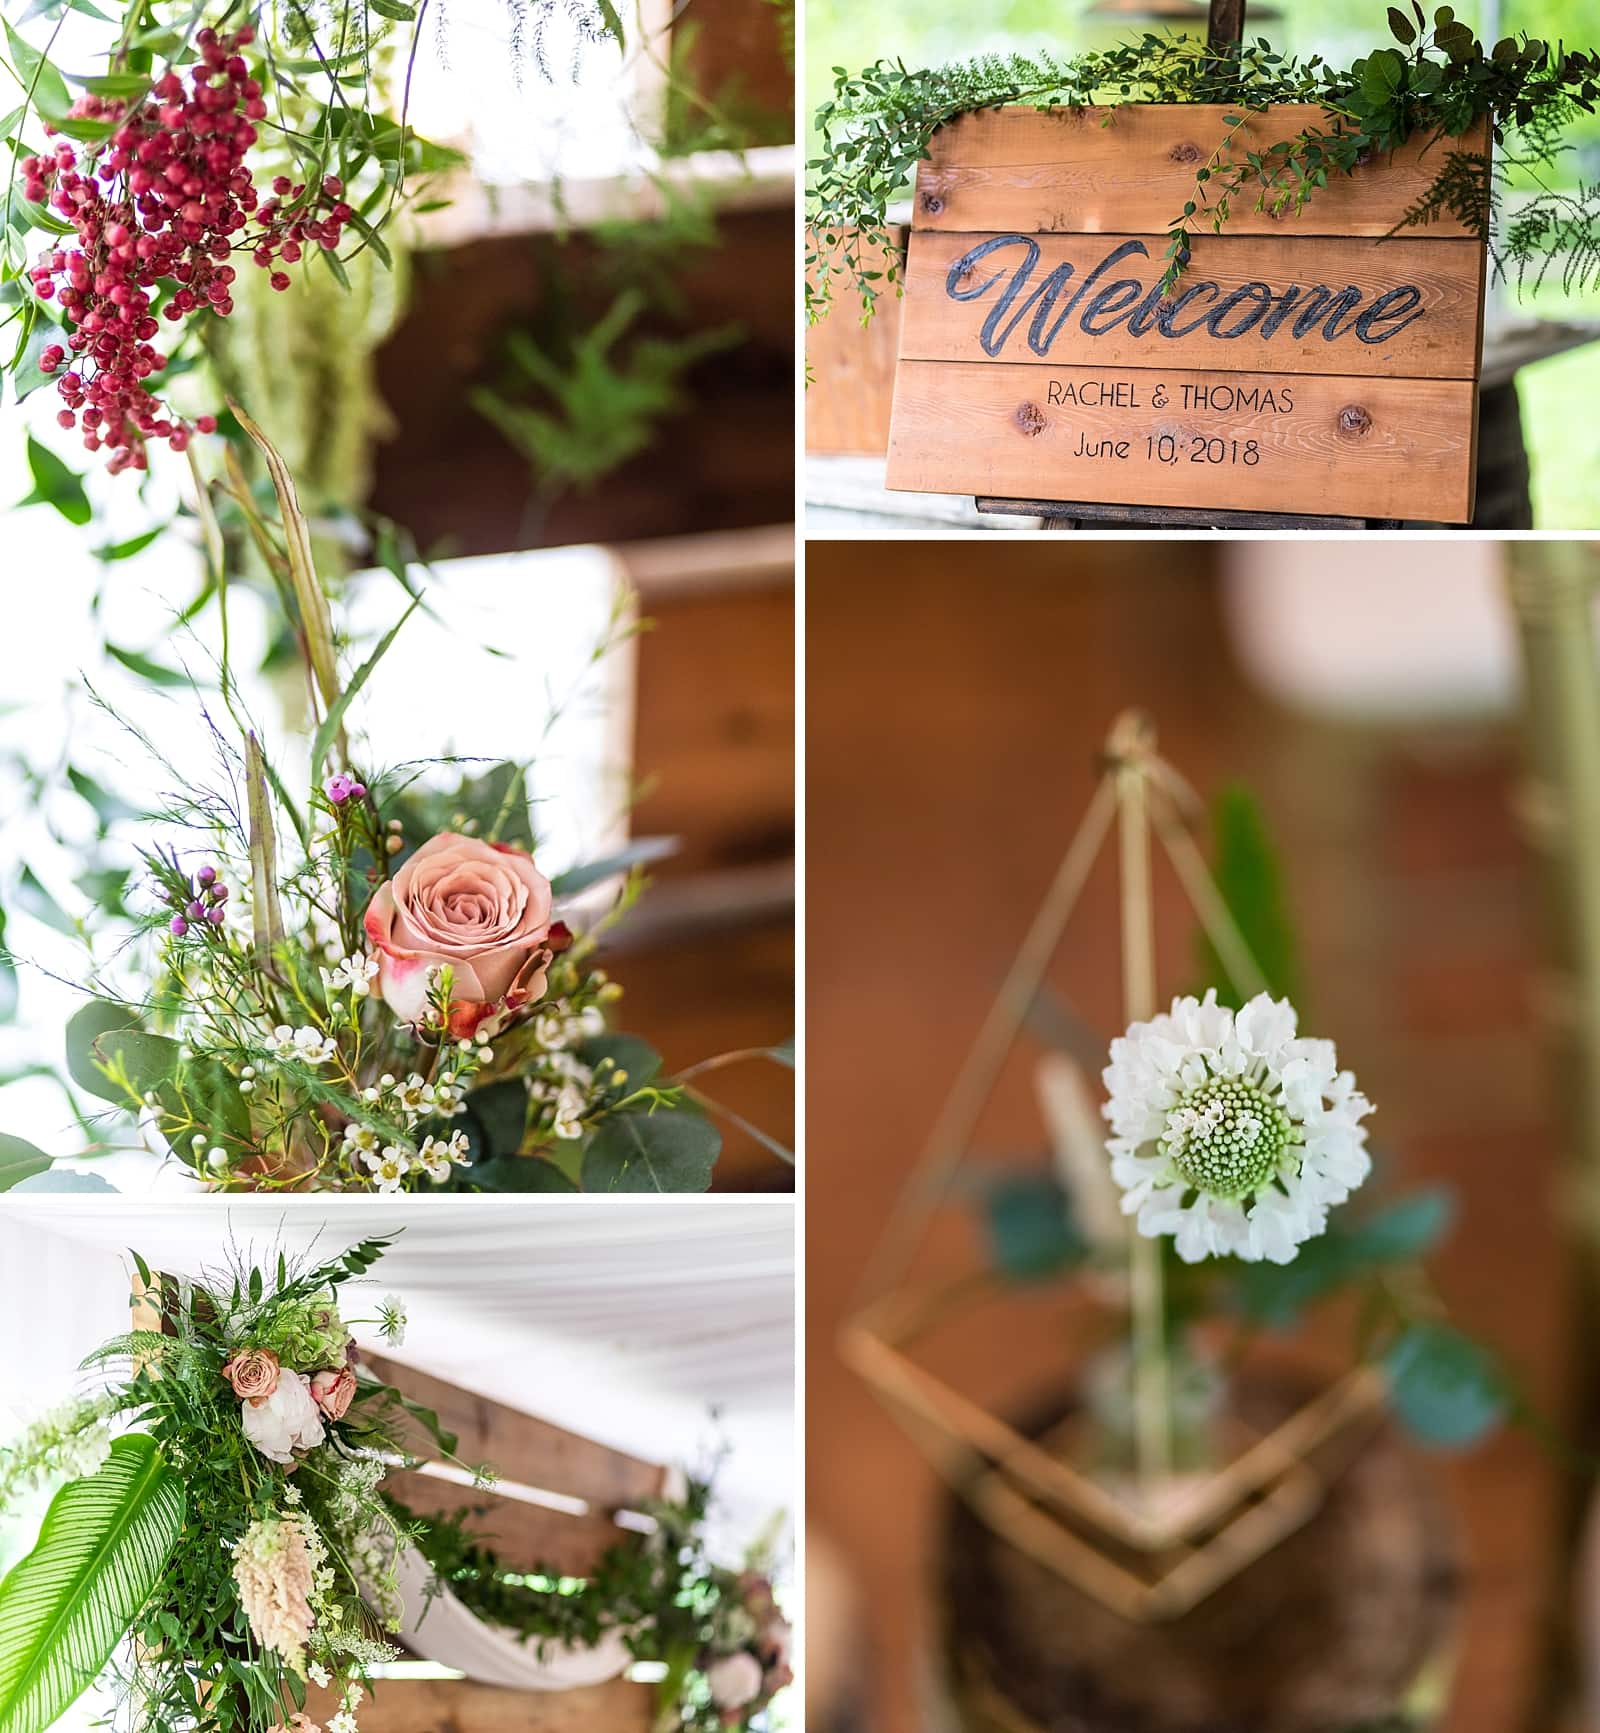 Ceremony details for a rustic wedding at the Inn at Millrace Pond with wildflowers and distressed wood